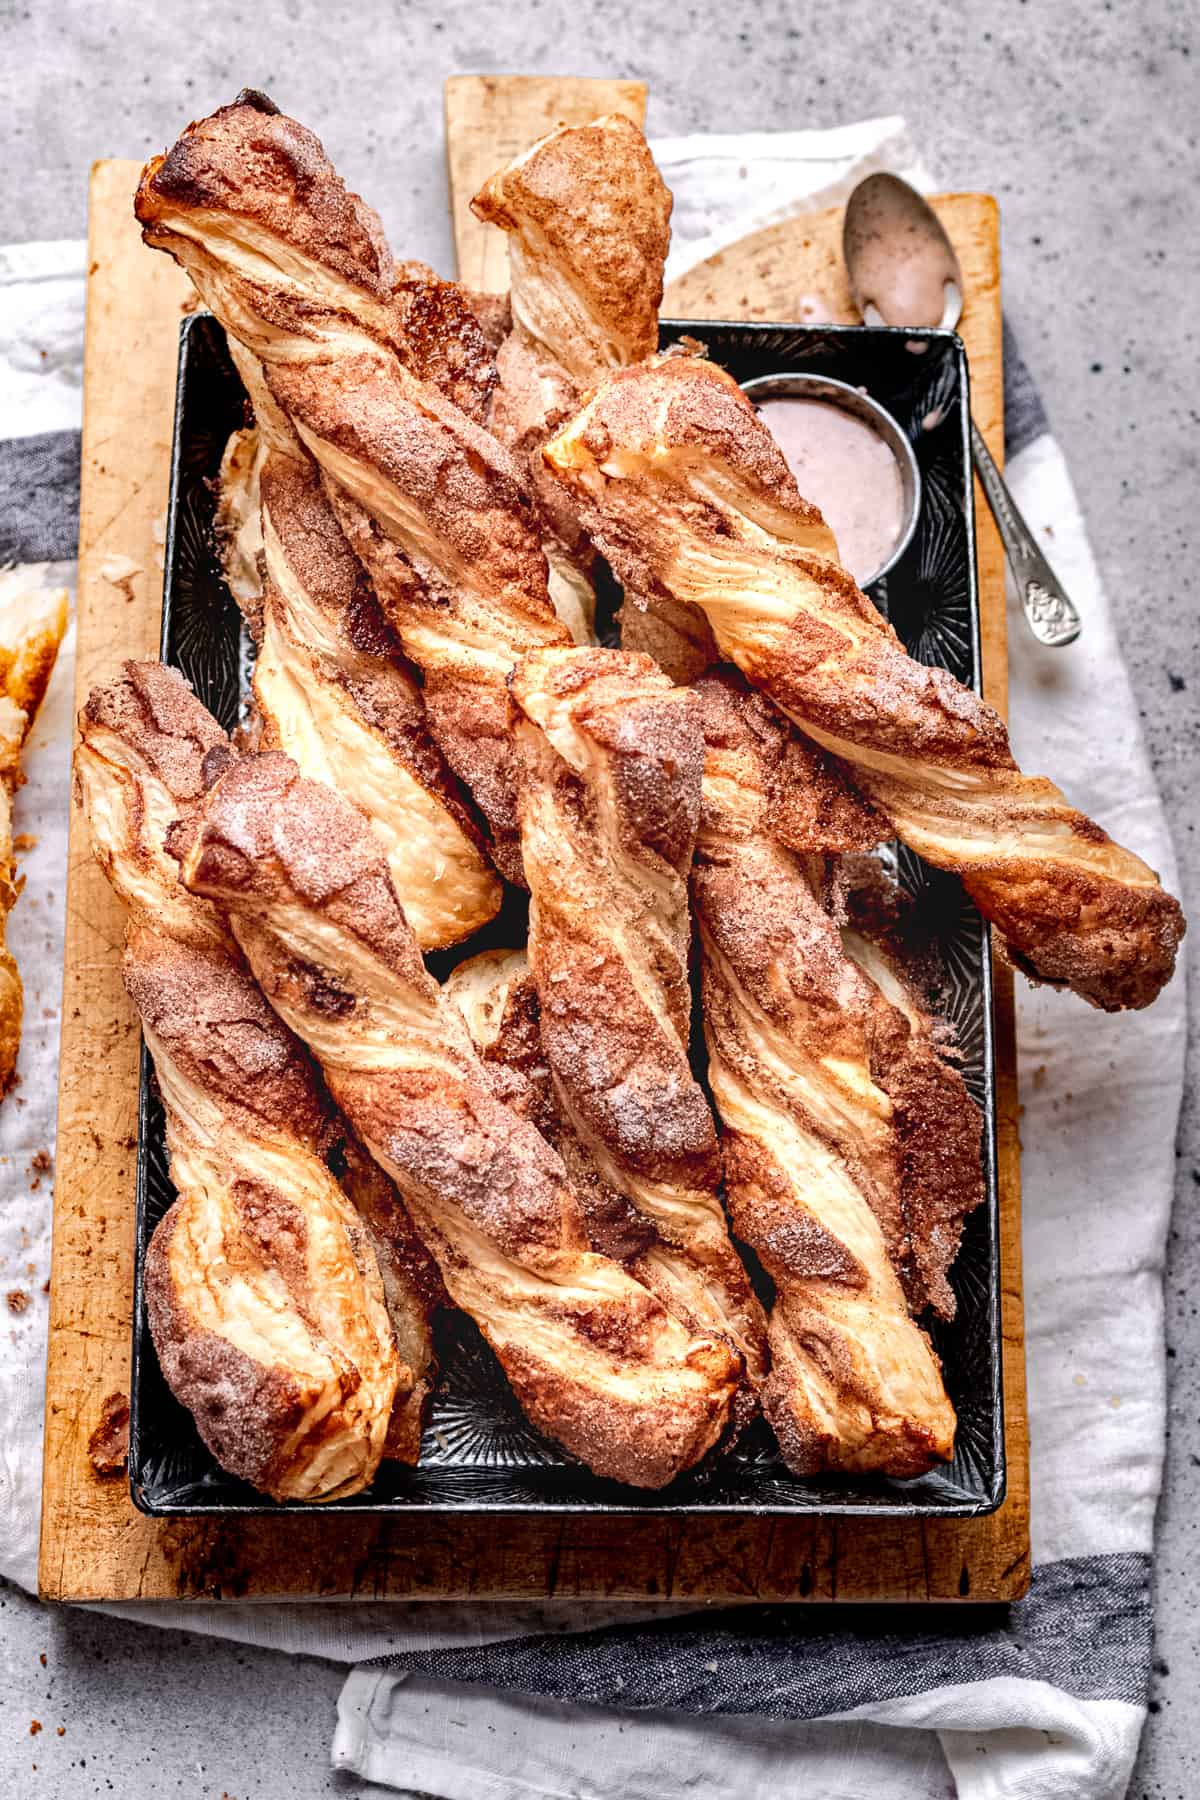 Cinnamon puff pastry twists in a baking tray.